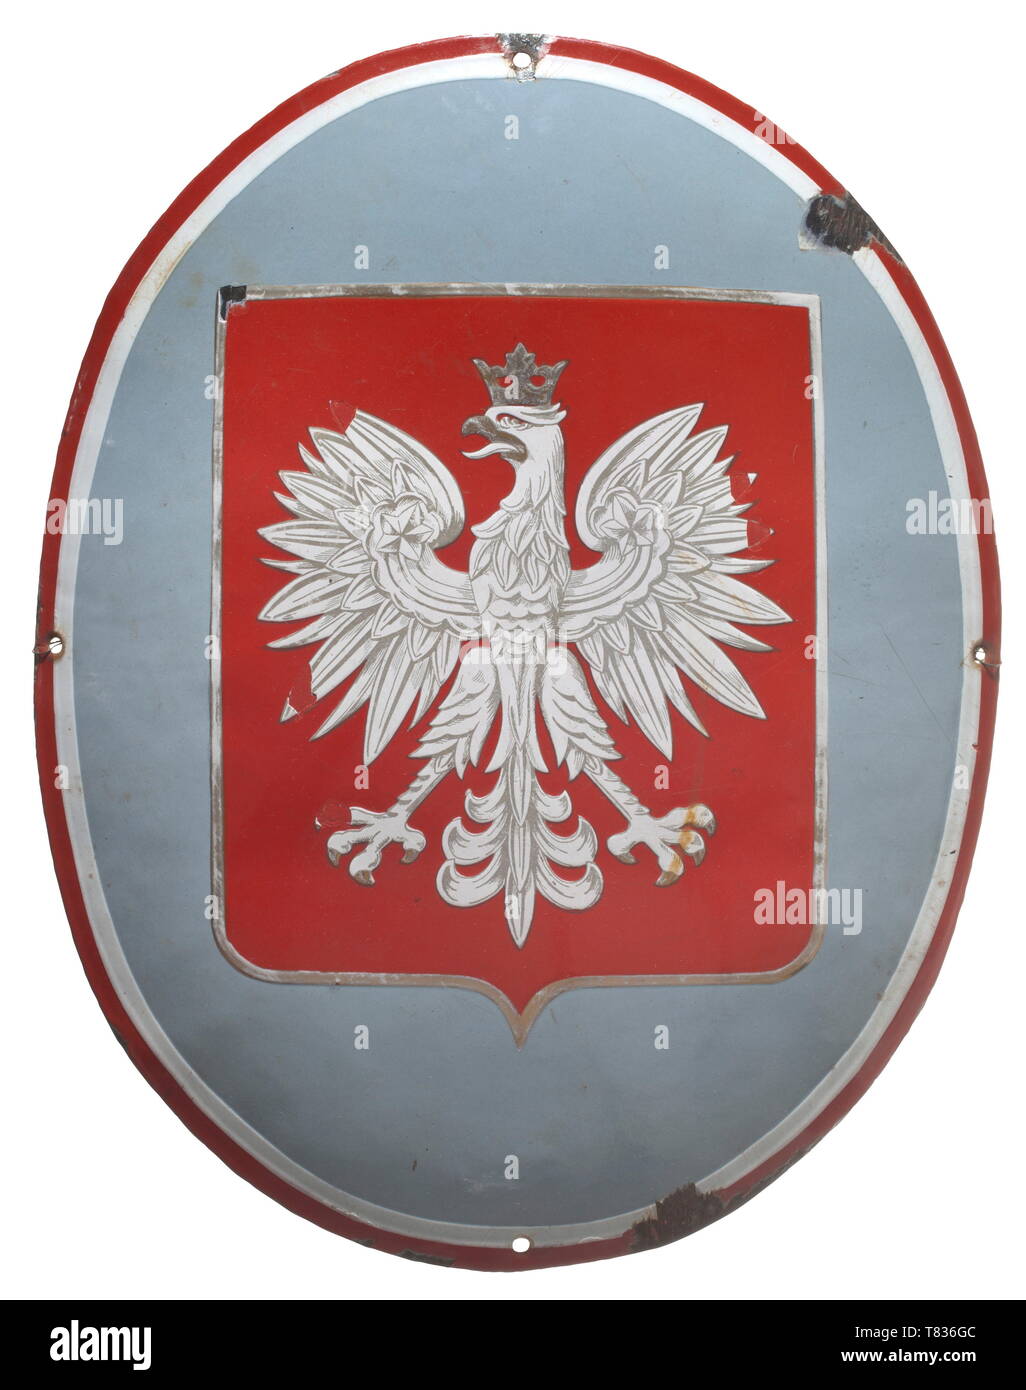 A sign of a Polish border station The convex sign made of sheet iron. The obverse applied with several layers of enamel. In the centre the Polish national eagle with red background. Border in the Polish national colours around the perimeter. Four fastening holes, size circa 40 x 51 x 4 cm. Signs of age and enamel damages. historic, historical, Poland, Europe, European, 20th century, Additional-Rights-Clearance-Info-Not-Available Stock Photo